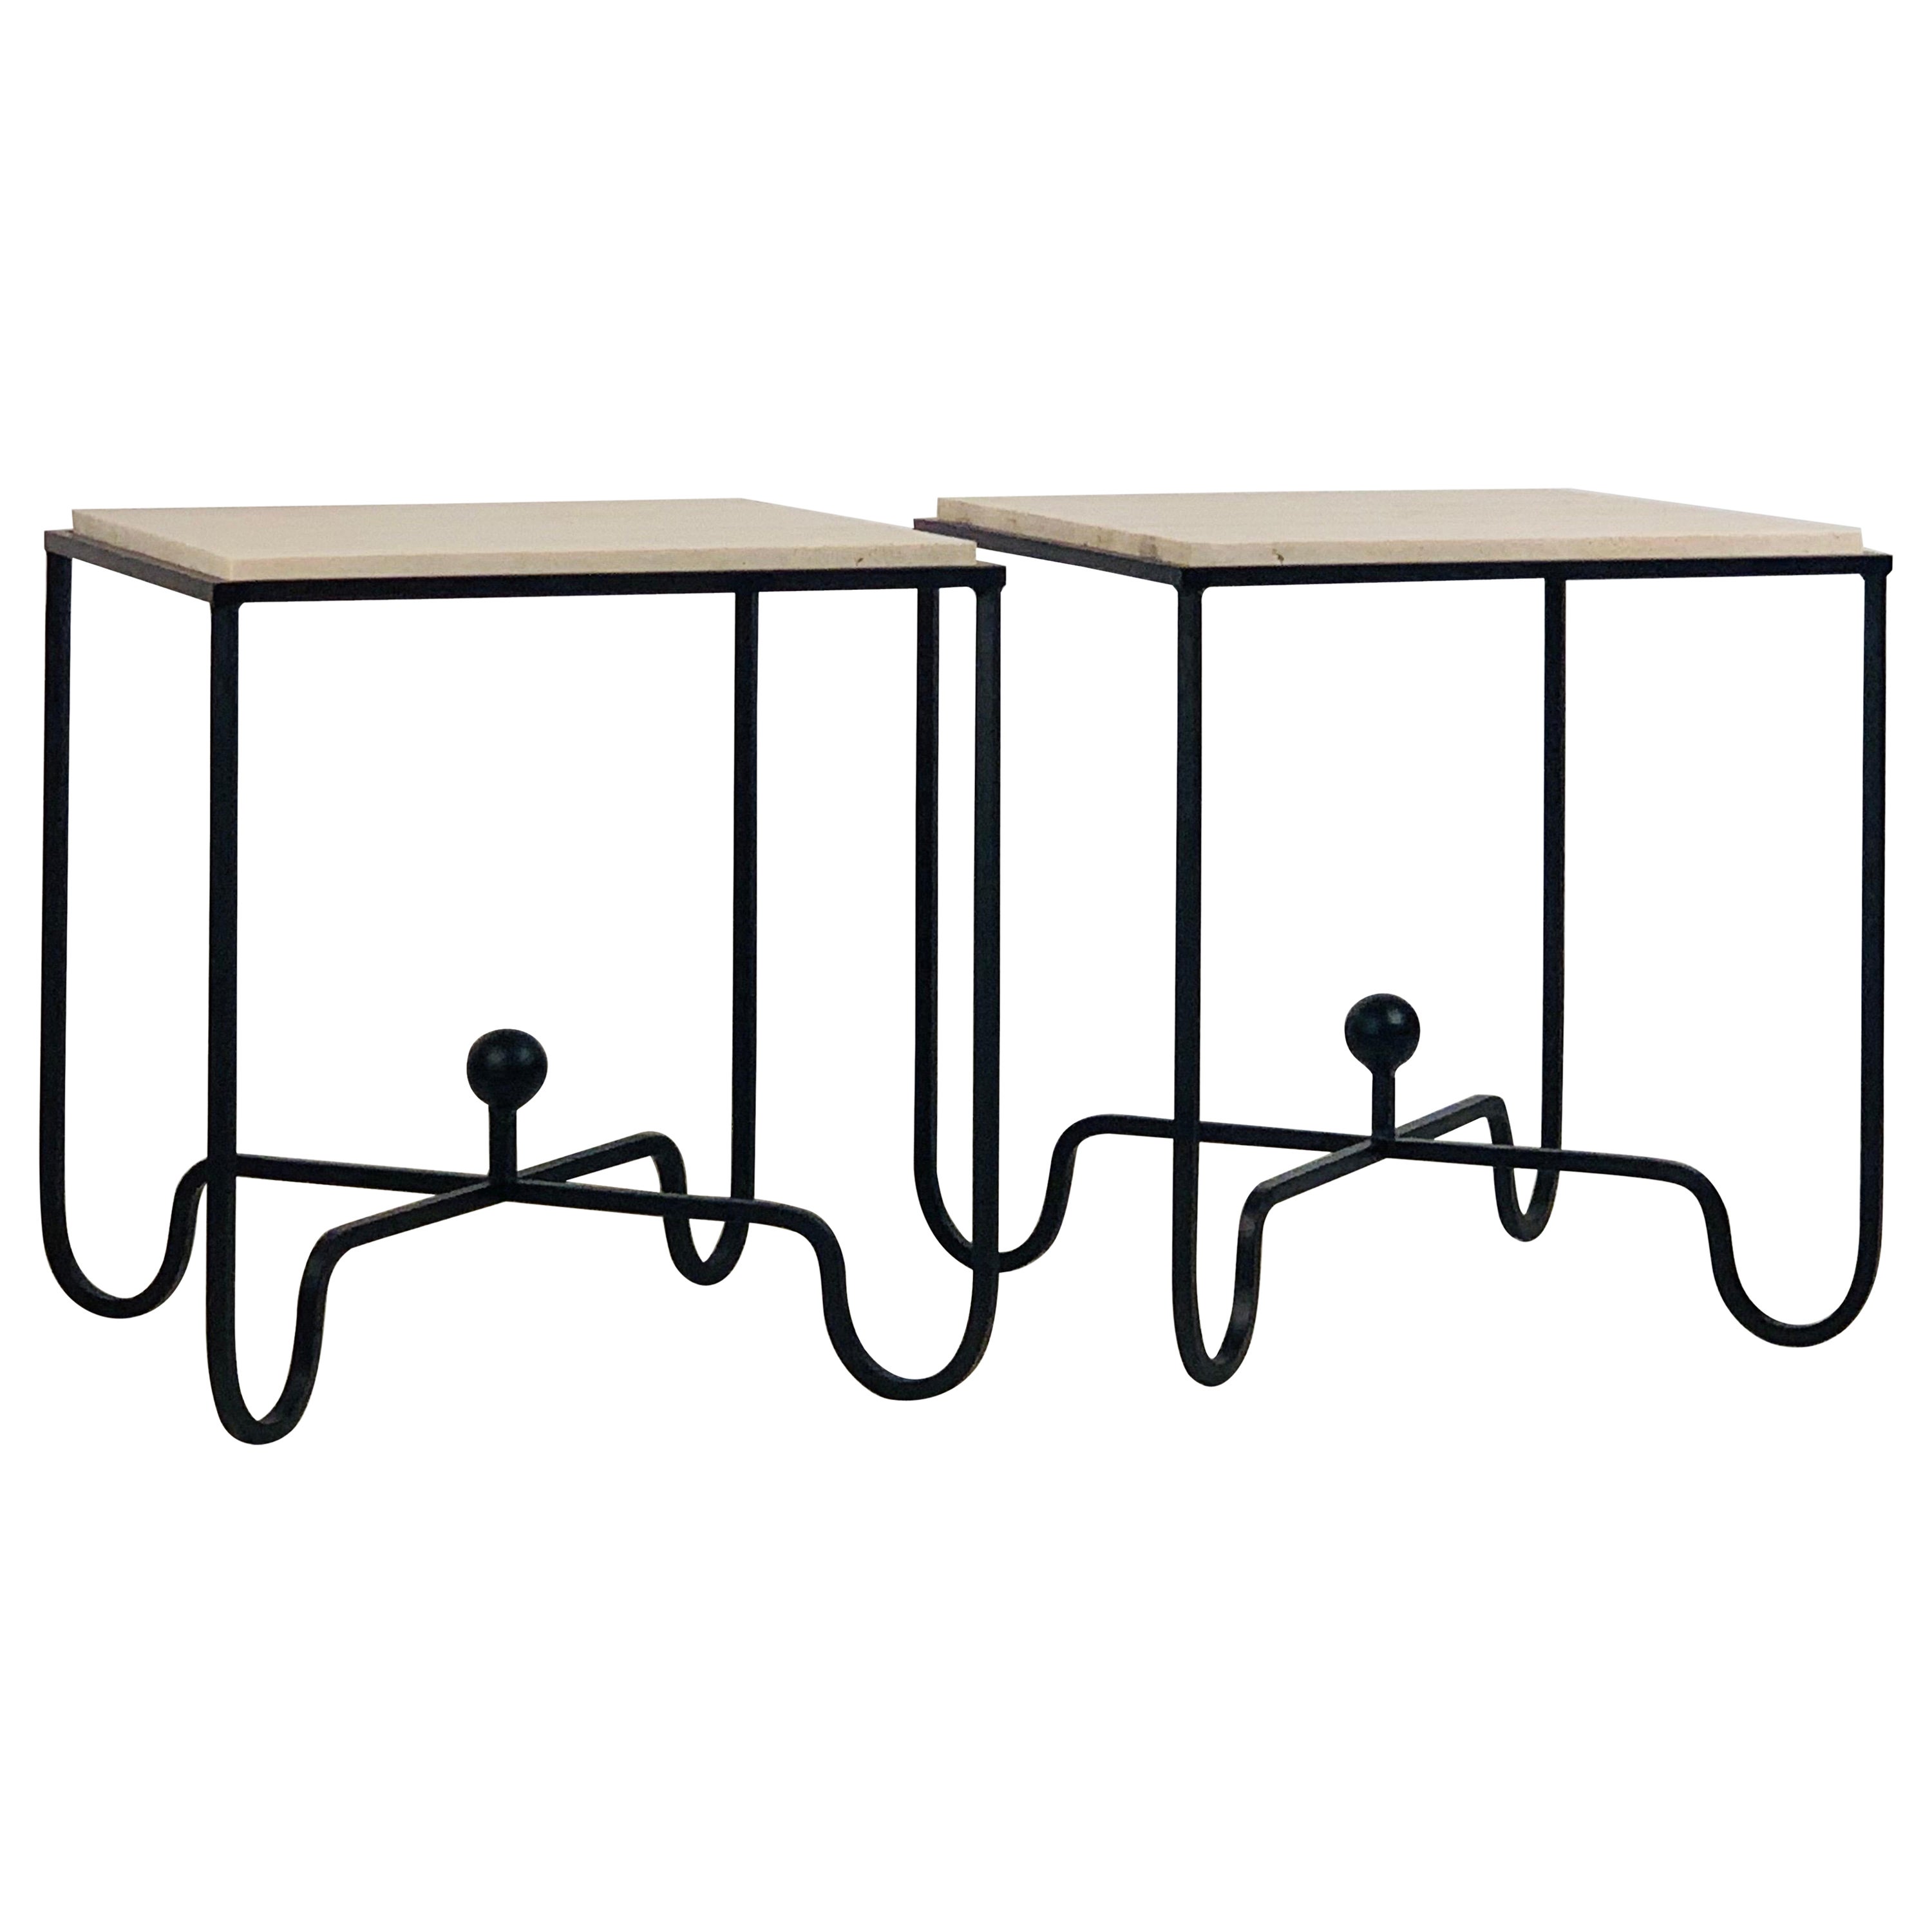 Pair of Tall Iron and Travertine 'Entretoise' Side Tables by Design Frères For Sale